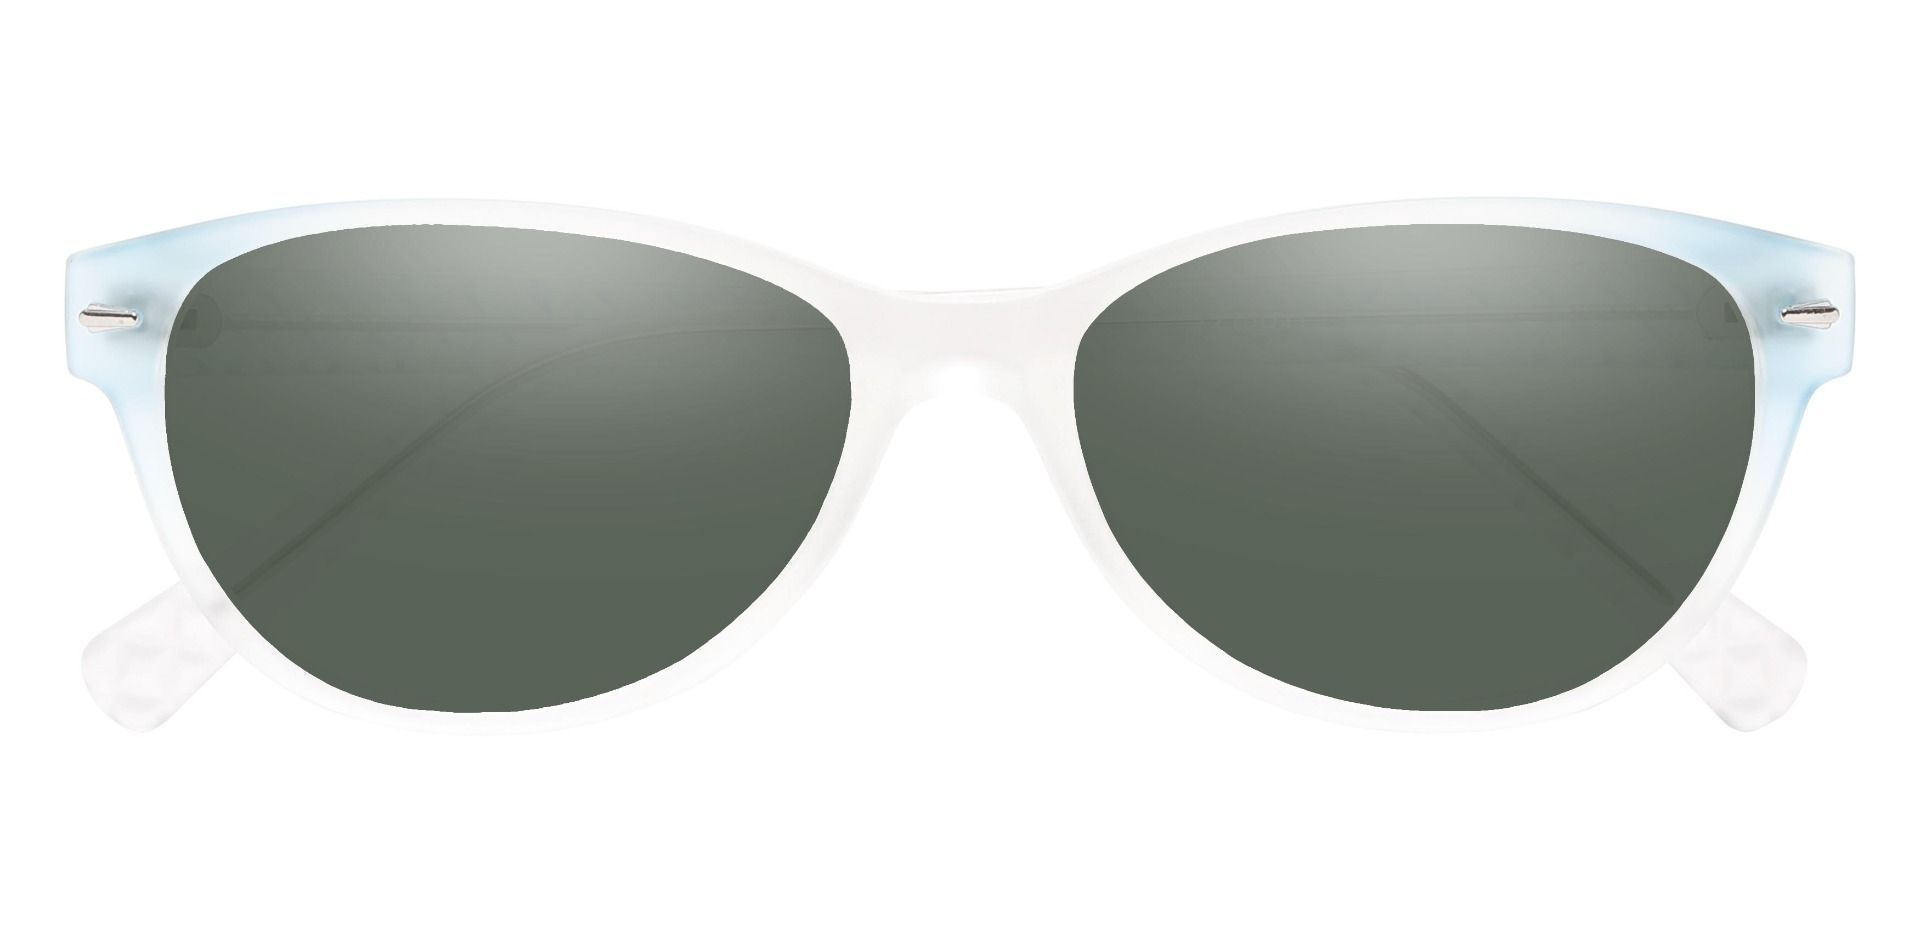 Olive Cat Eye Non-Rx Sunglasses - Blue Frame With Green Lenses